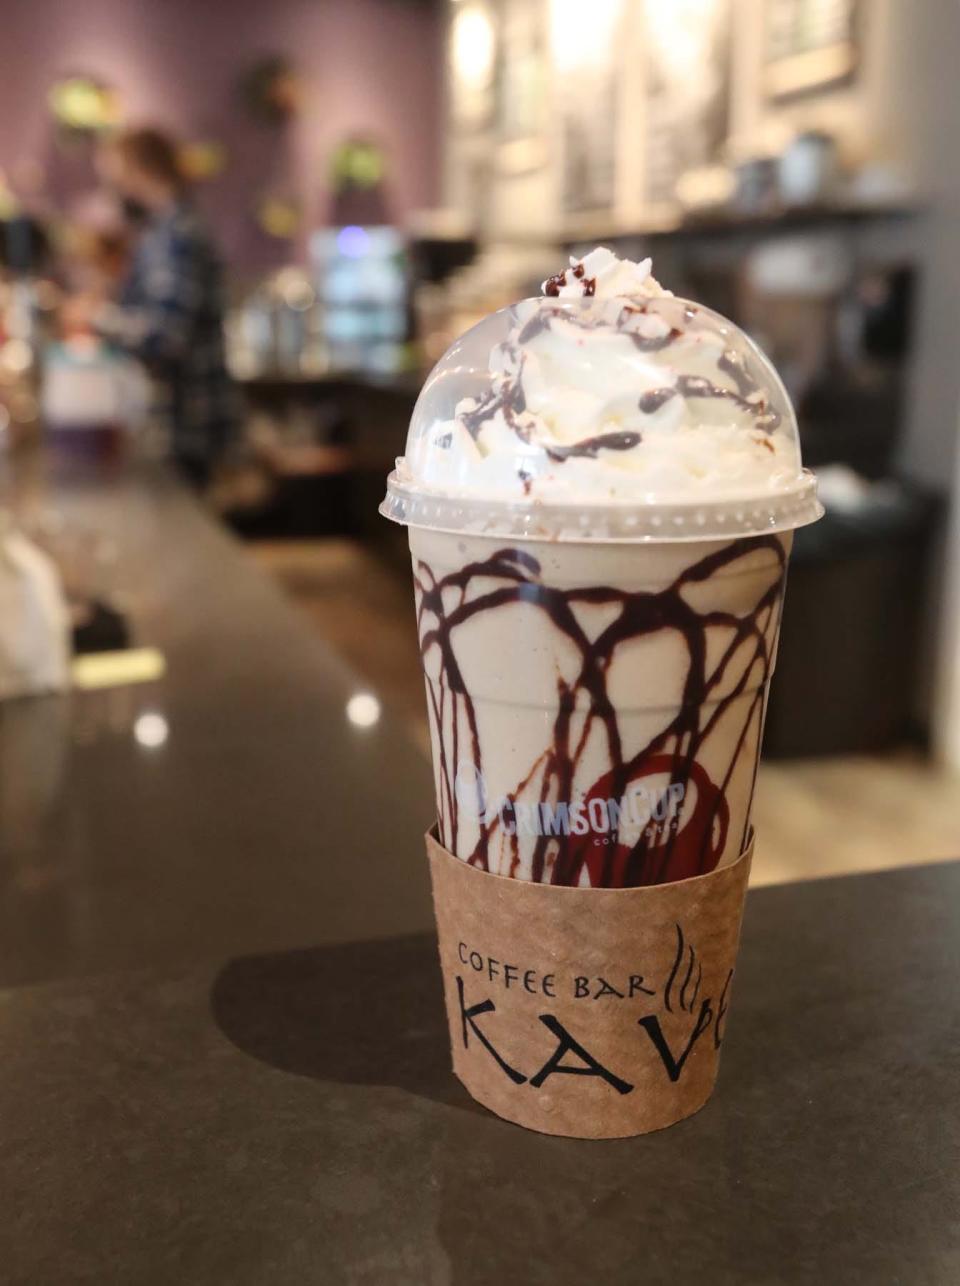 Have offers a wide variety of beverages at Kave Coffee Bar in downtown Barberton including this frozen peppermint mocha.